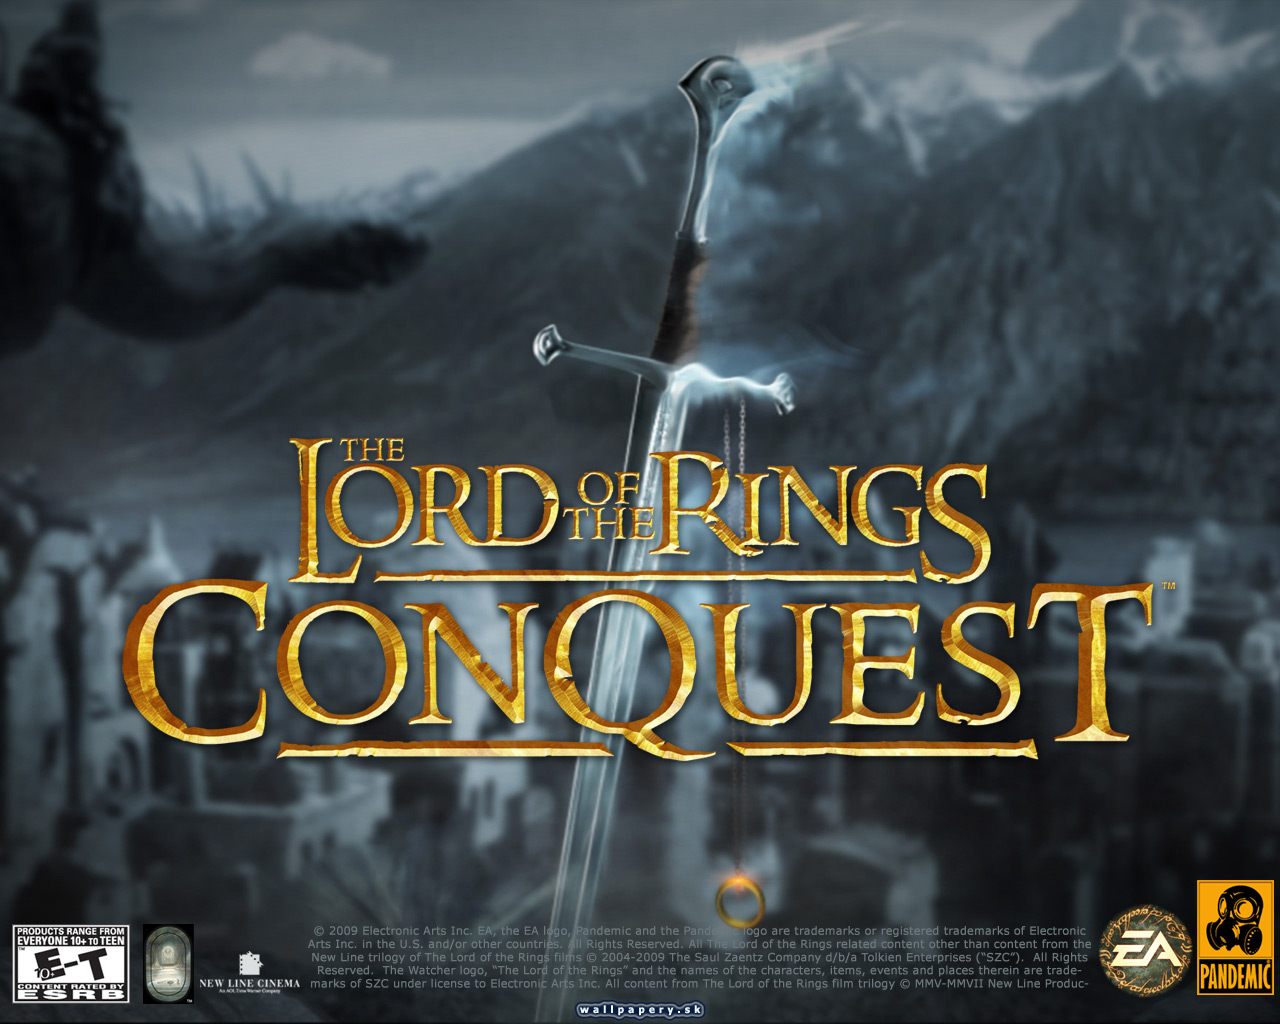 The Lord of the Rings: Conquest - wallpaper 3